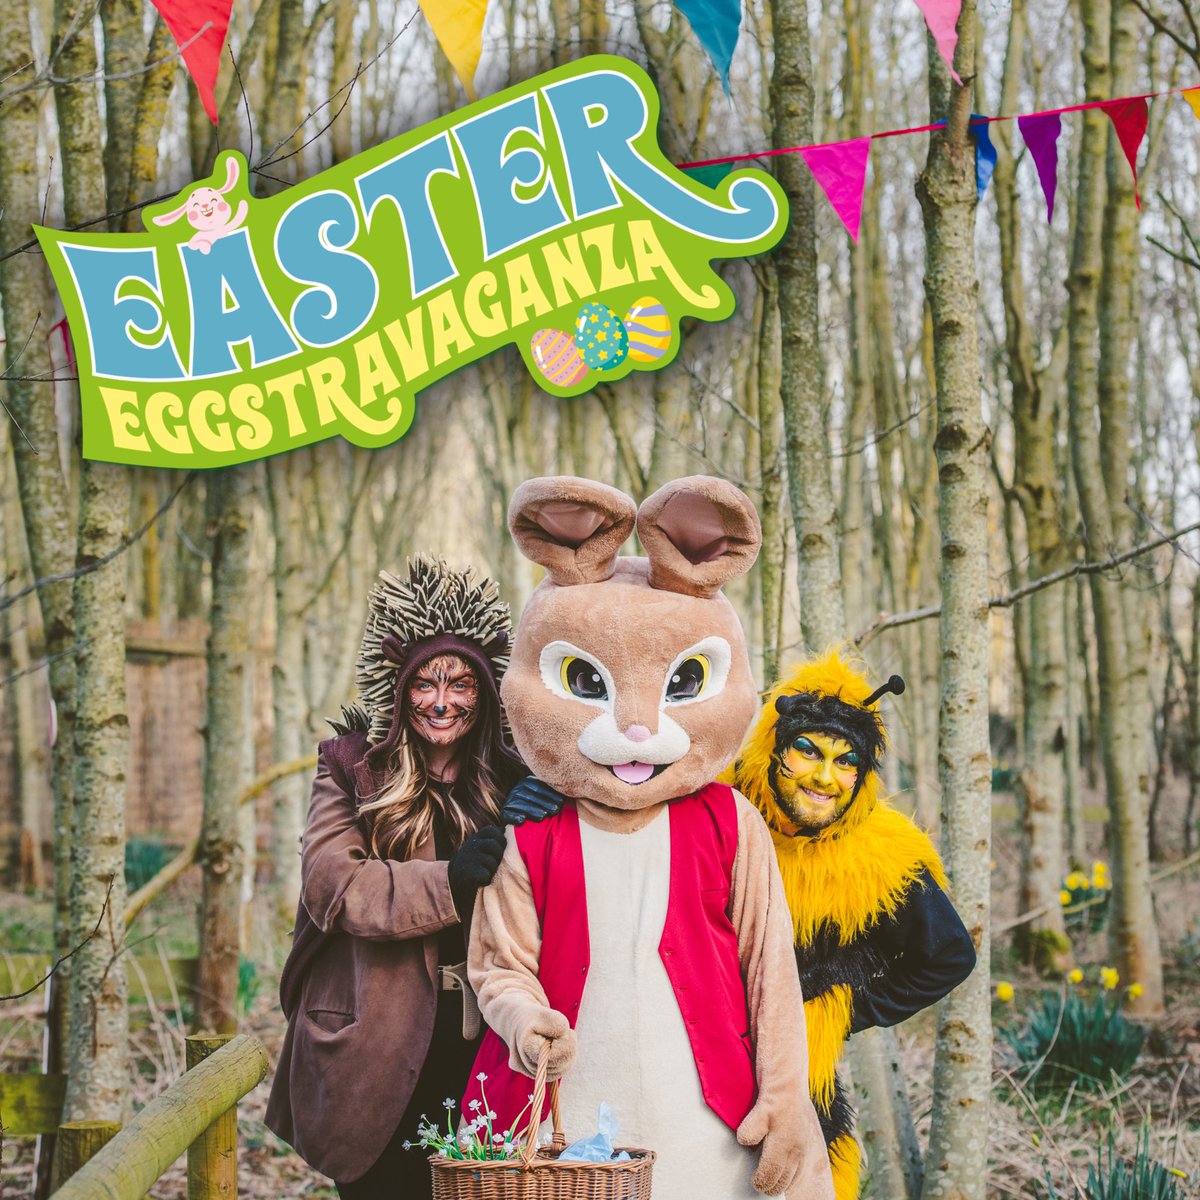 Easter Eggstravaganza is starting on the 23rd March! 🤩🐰✨ Who’s going to be joining us for some egg-citing fun!? 👉adventurefarm.co.uk